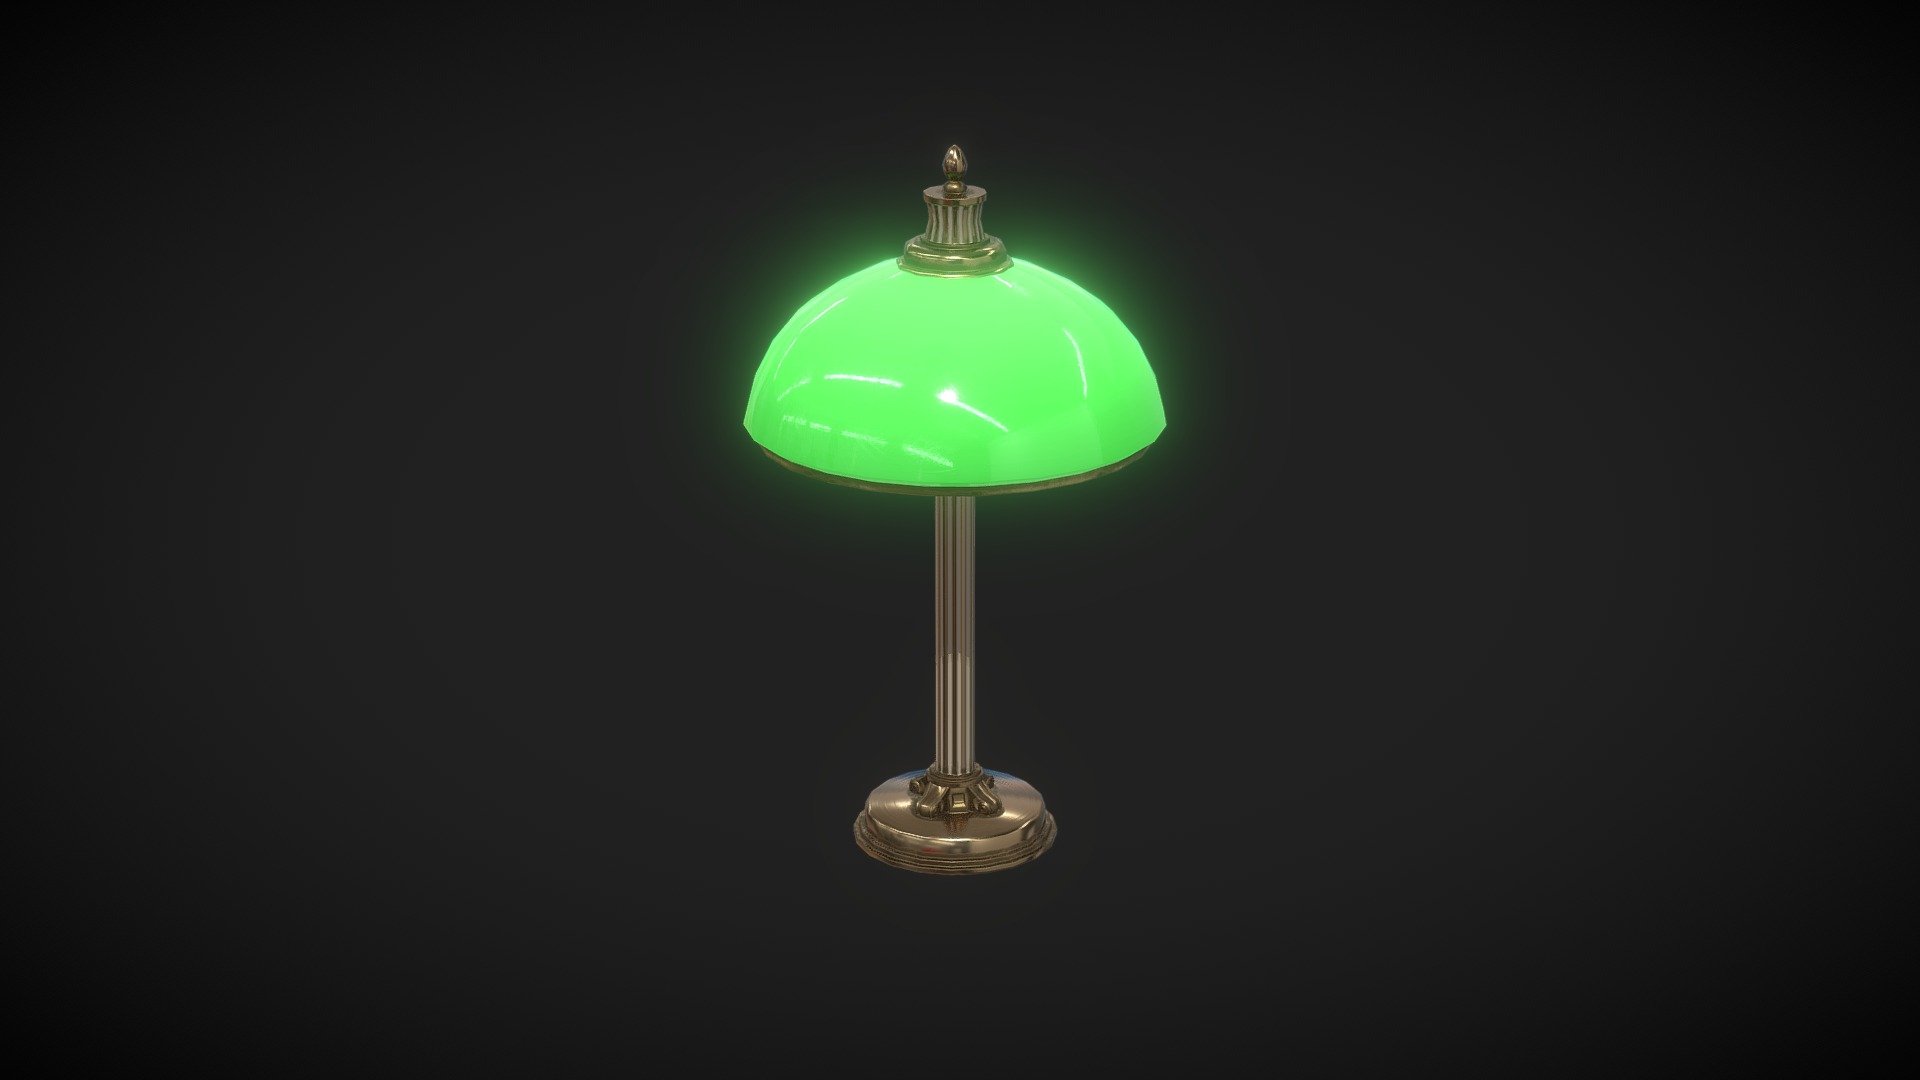 The latest version of the table lamp

version 01: https://sketchfab.com/3d-models/old-table-lamp-v01-cecd36db0c90422cbd81c2a0c3ace4f0

version 02: https://sketchfab.com/3d-models/old-table-lamp-v02-70659923adc74413ba983516139e222d

DirectX Normal map - Old Table Lamp V03 - Download Free 3D model by MAR.COS. 3d model